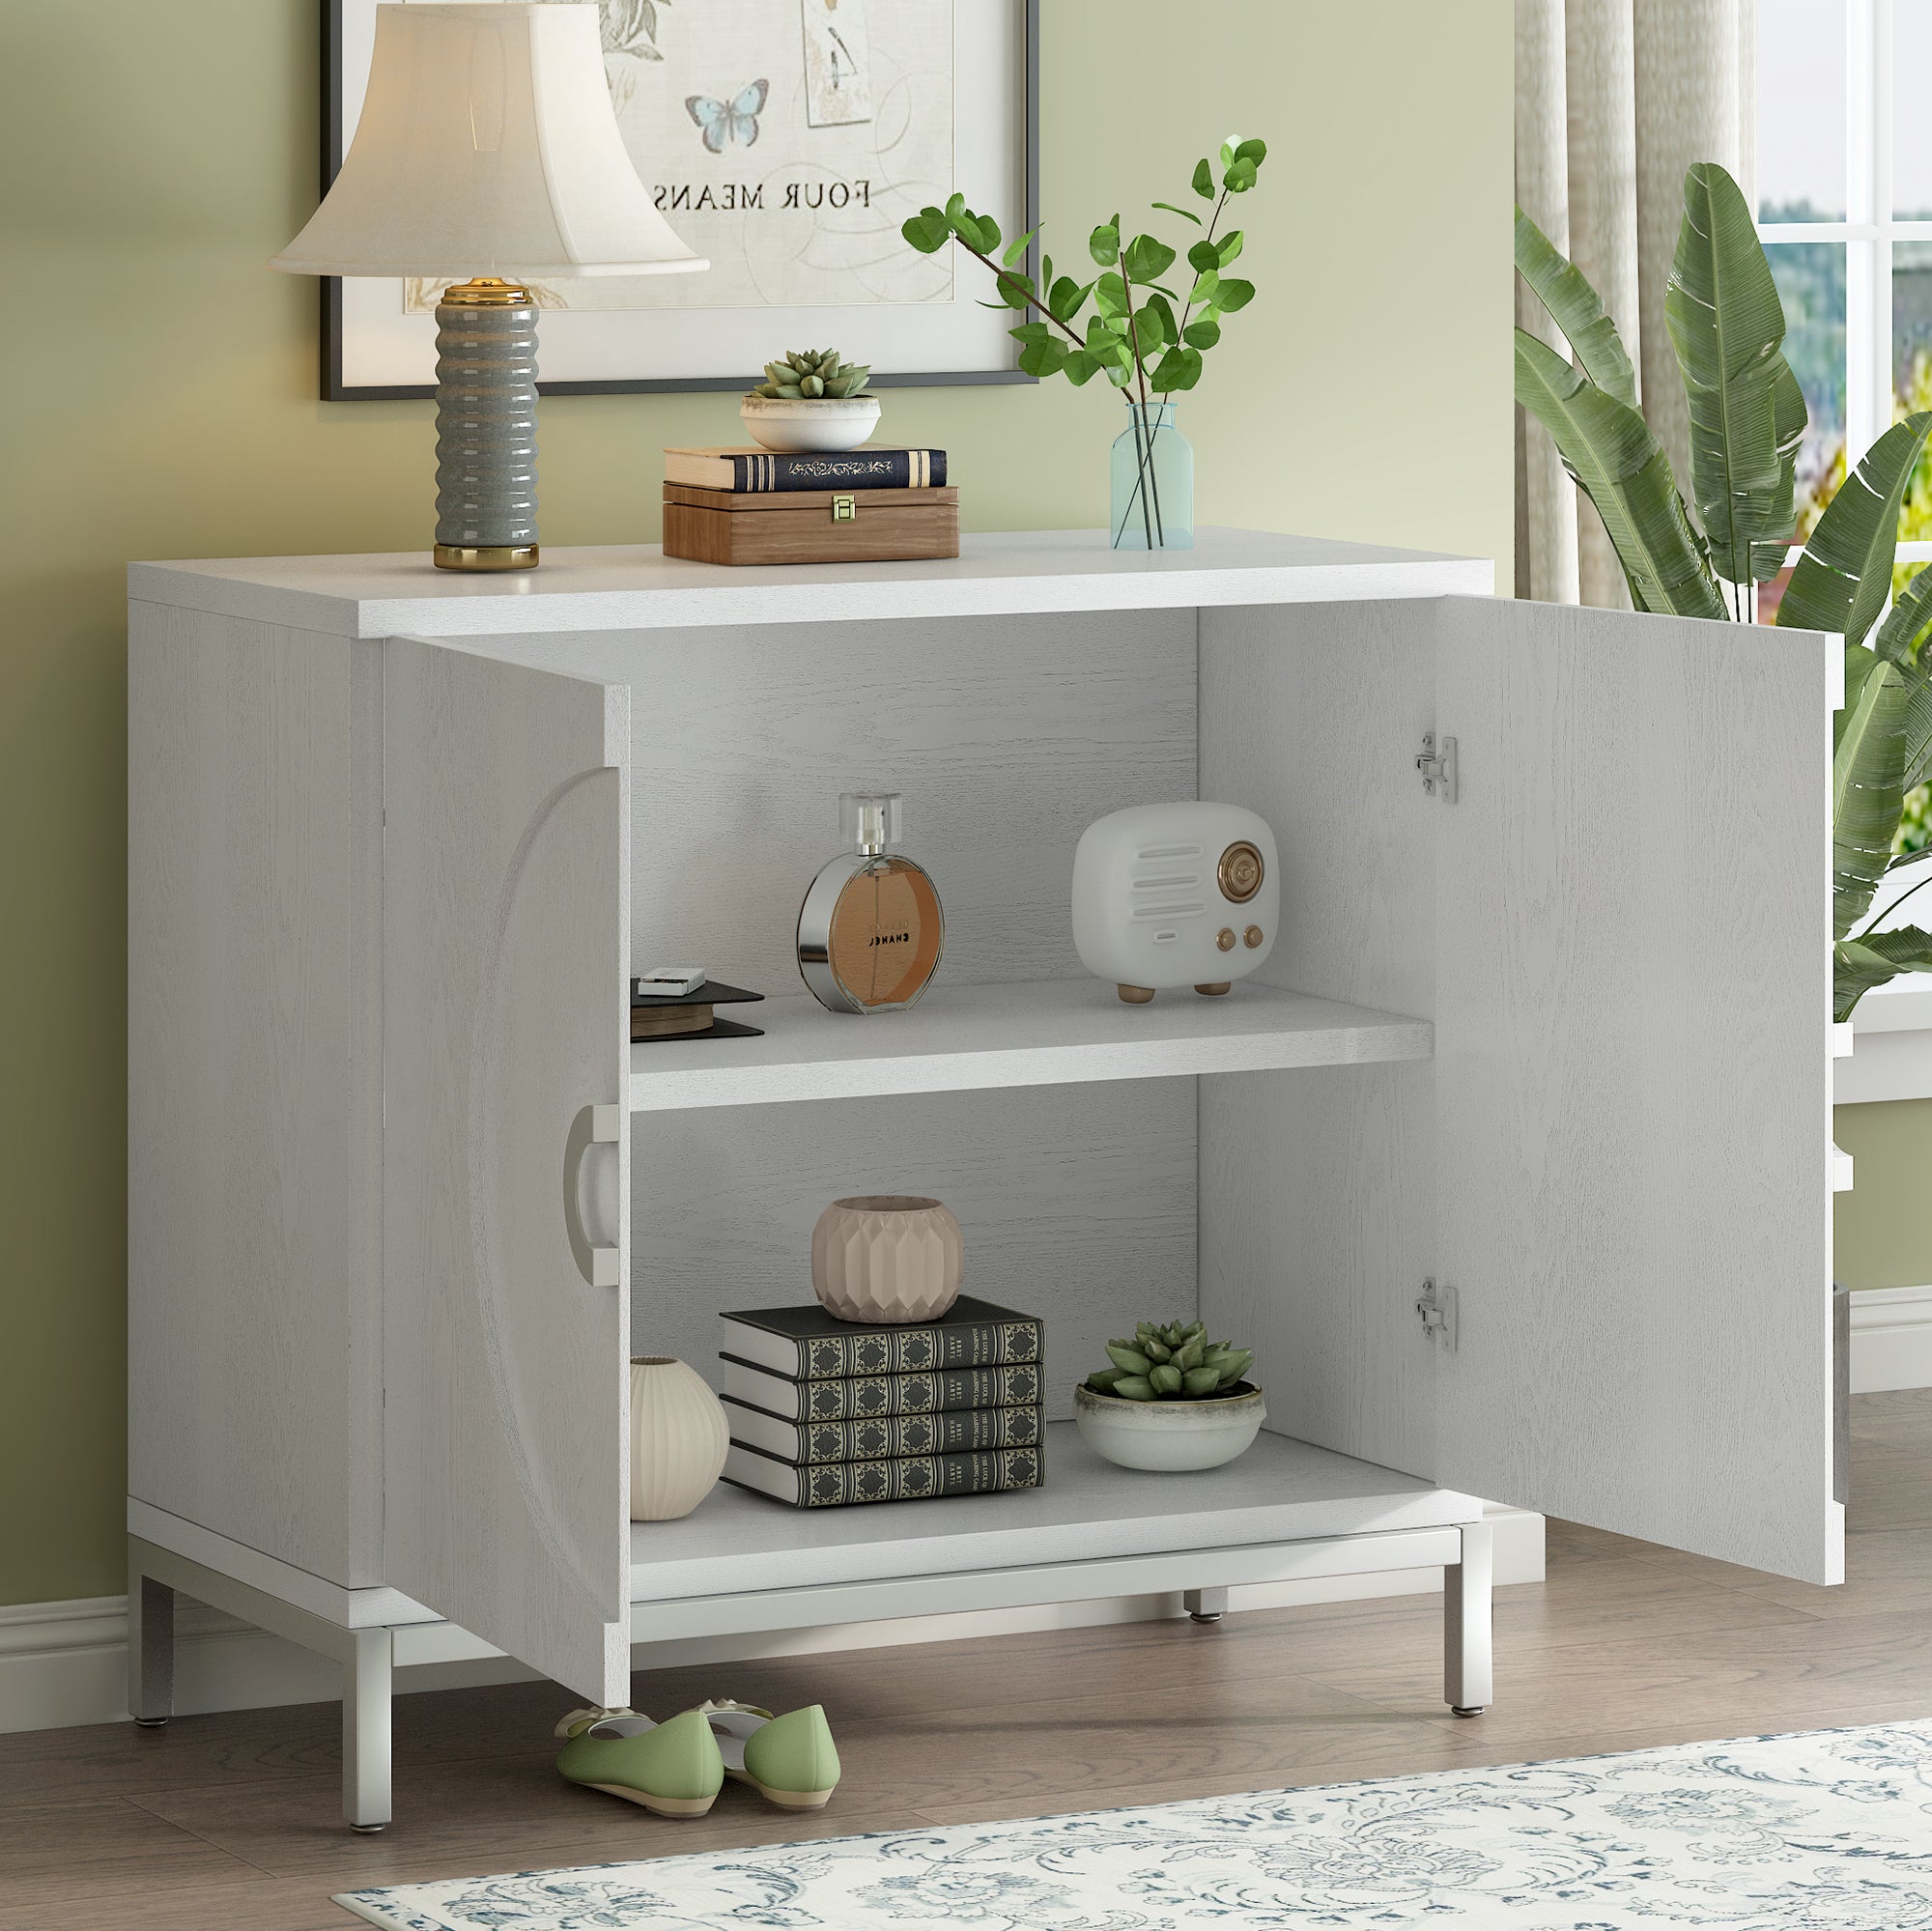 Accent Cabinet with Solid Wood Veneer and Metal Leg Frame for Living Room, Entryway, Dining Room - White